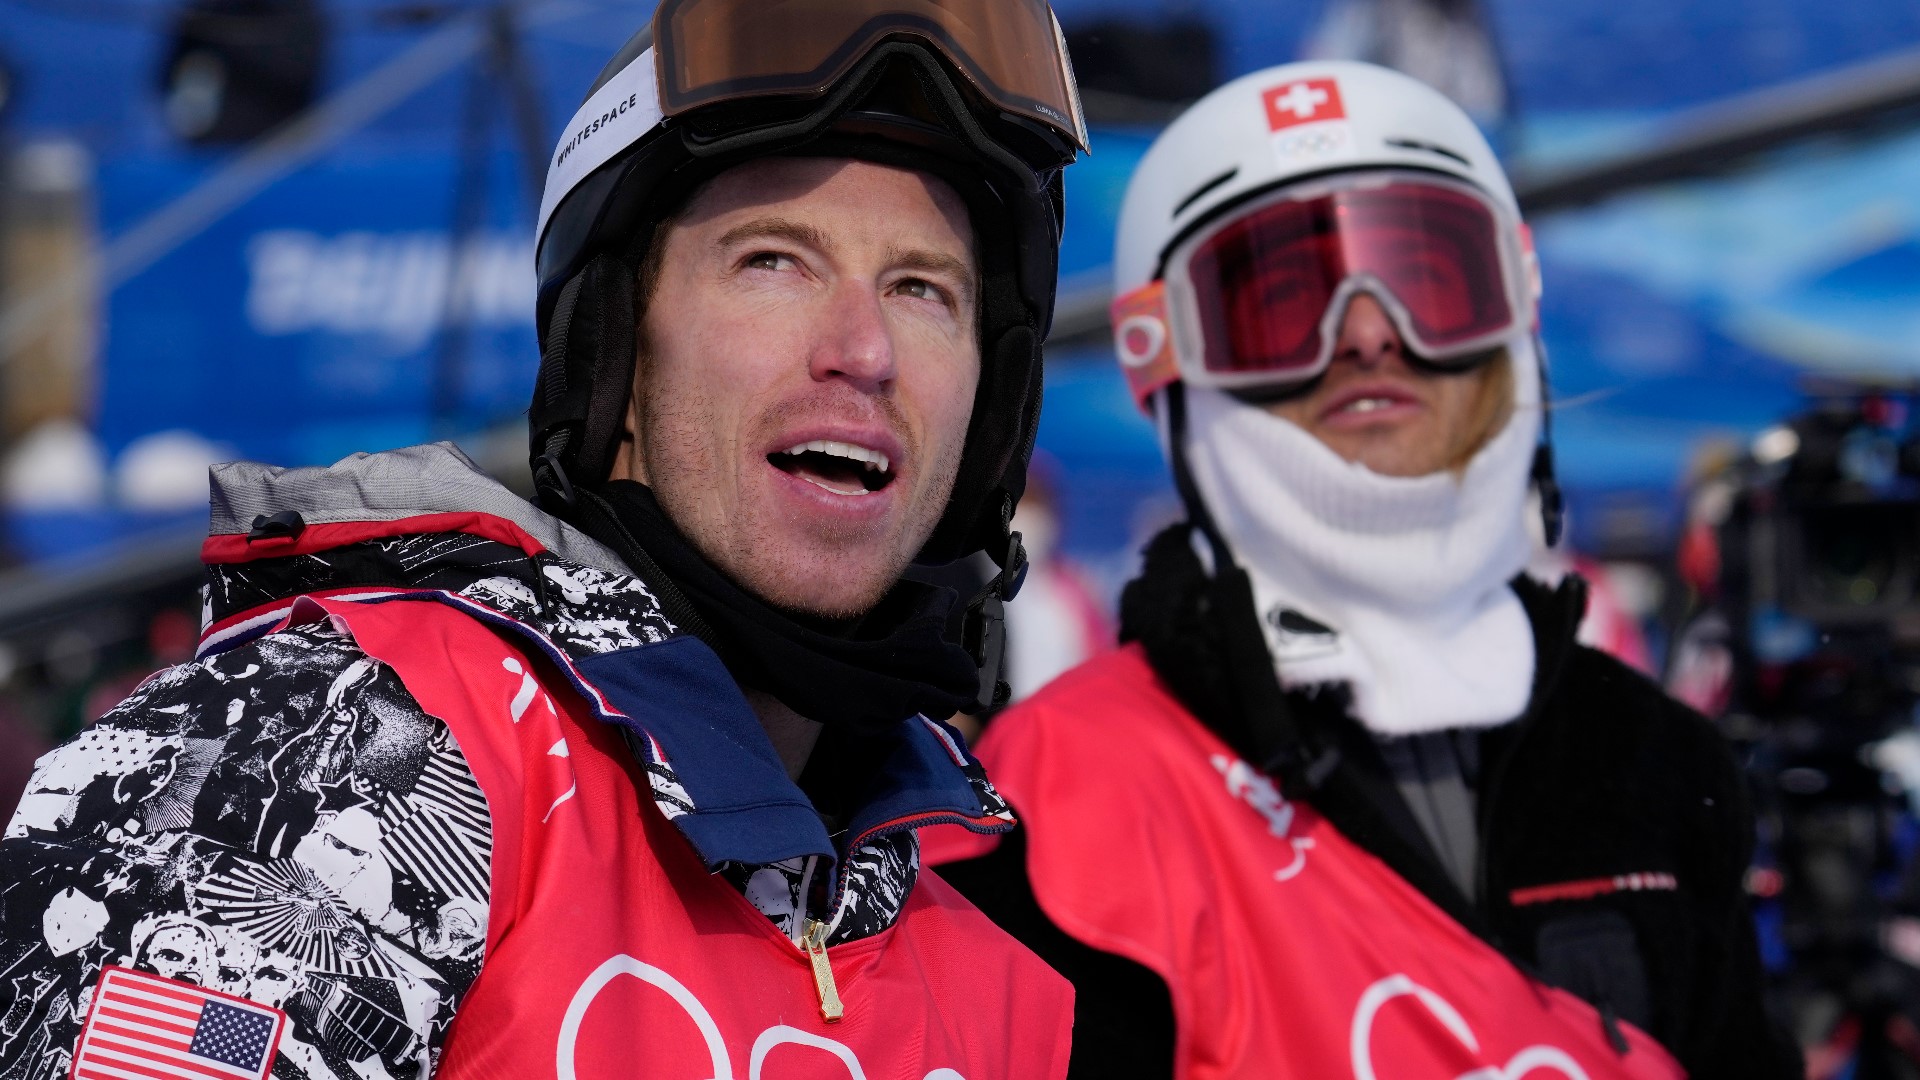 3-time champion and defending gold medalist Shaun White will compete in the men's snowboard halfpipe final Thursday, which he says will be the last of his career.